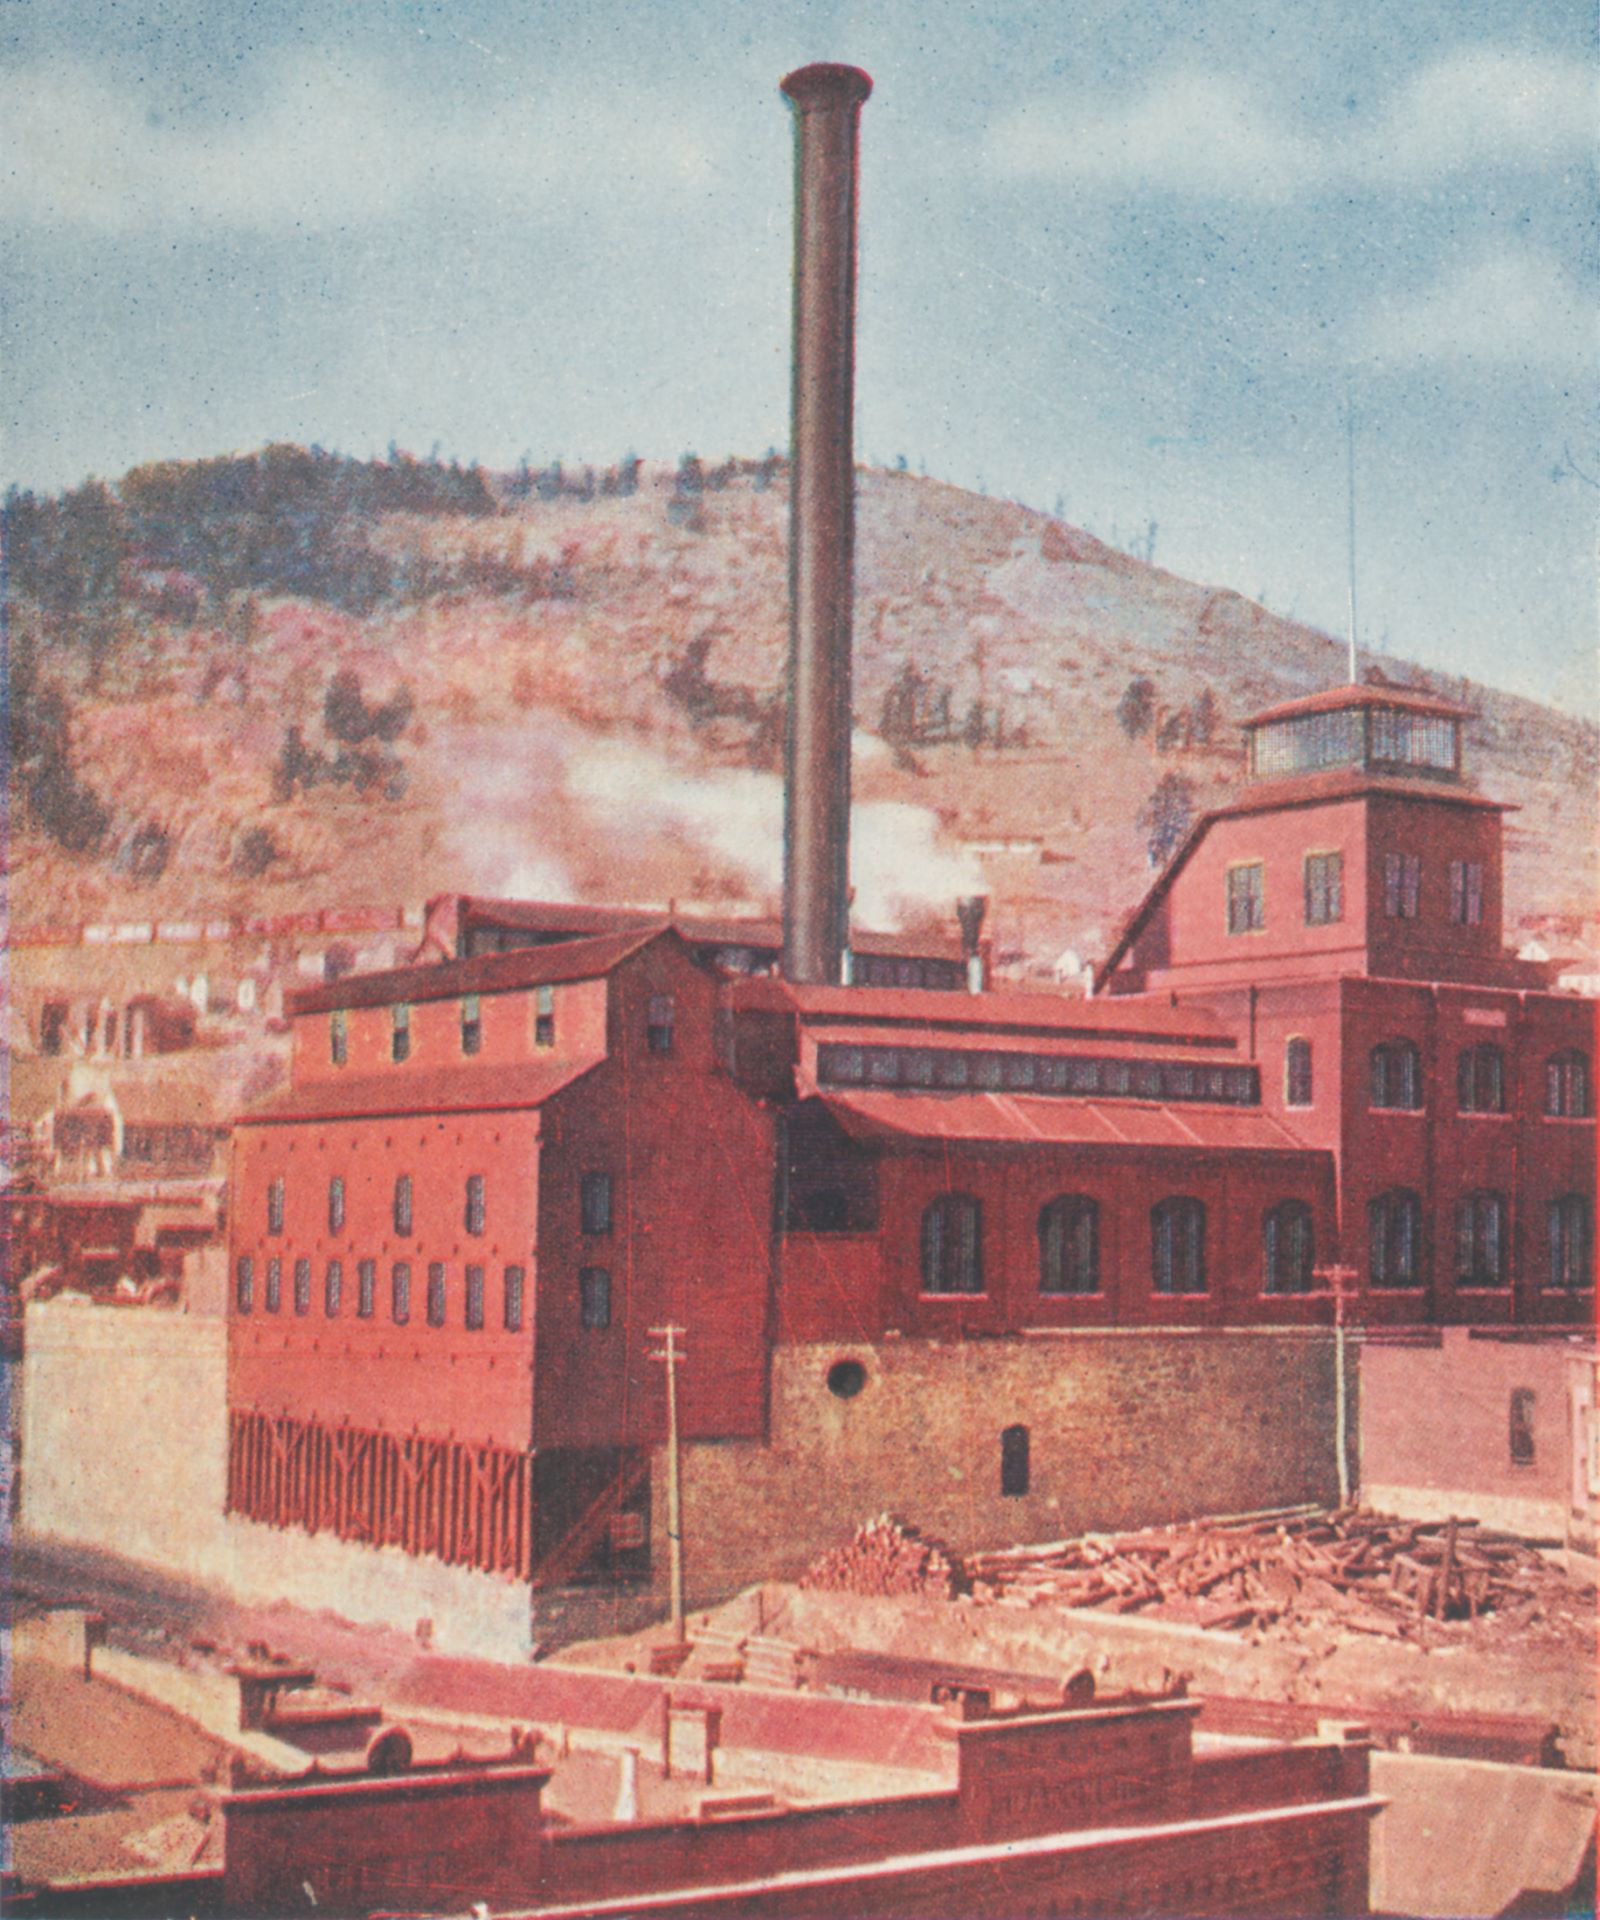 This view shows the Gold Coin Mine in Victor in all its glory, focusing more on the Ore-house. One get to see the foundation walls which still for the most part is still there in Victor, with its brick based shaft-house with the stained-glass windows and tower like part over the top of the head frame. The smokestack is very visible in this view, and in the background, is the Squaw Mountain seen, with the mainline of the M.T. seen just behind the top of the orehouse.